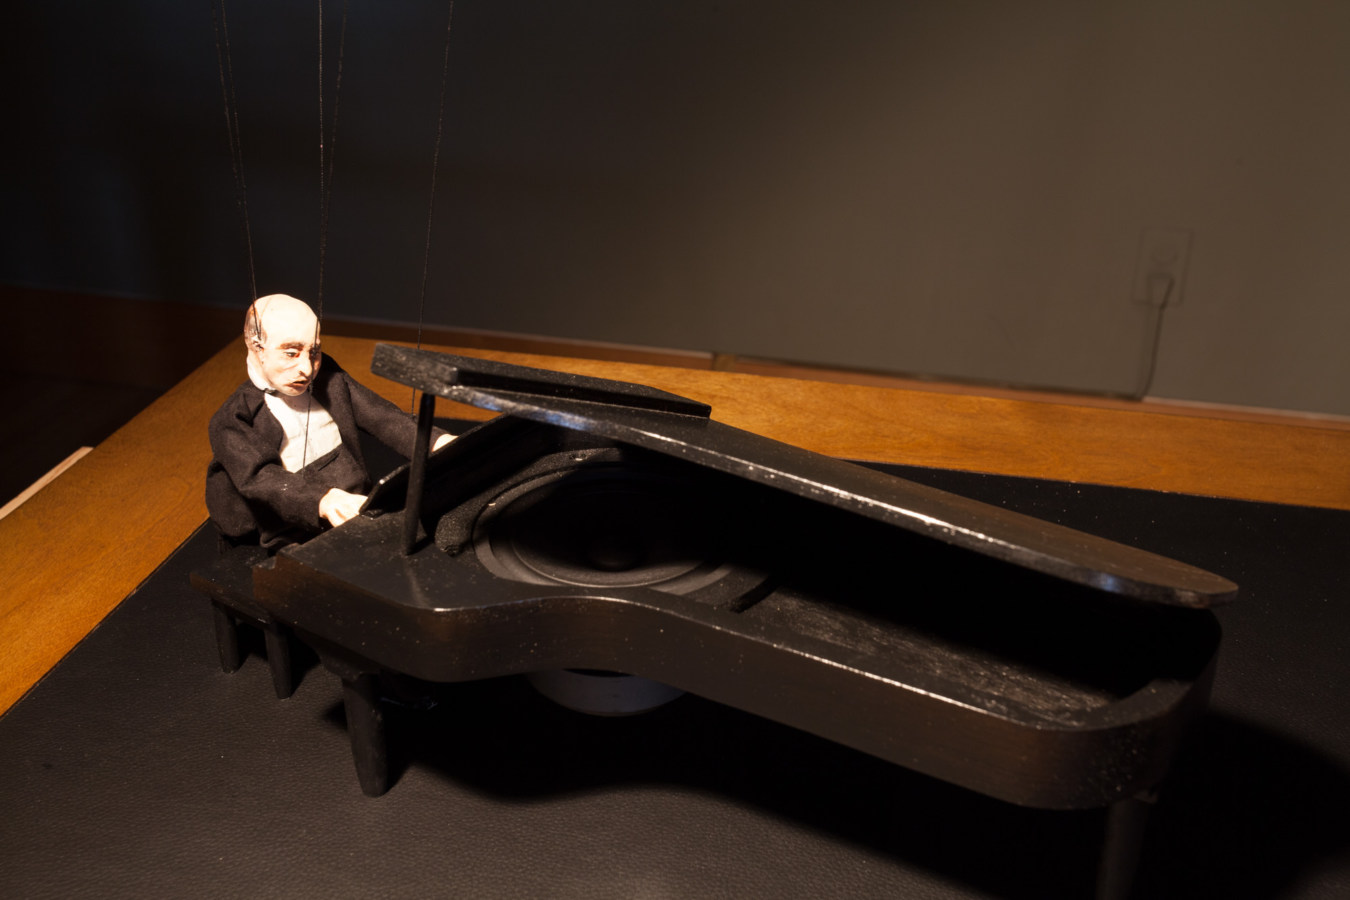 Color image of marionette depicting a pianist playing piano